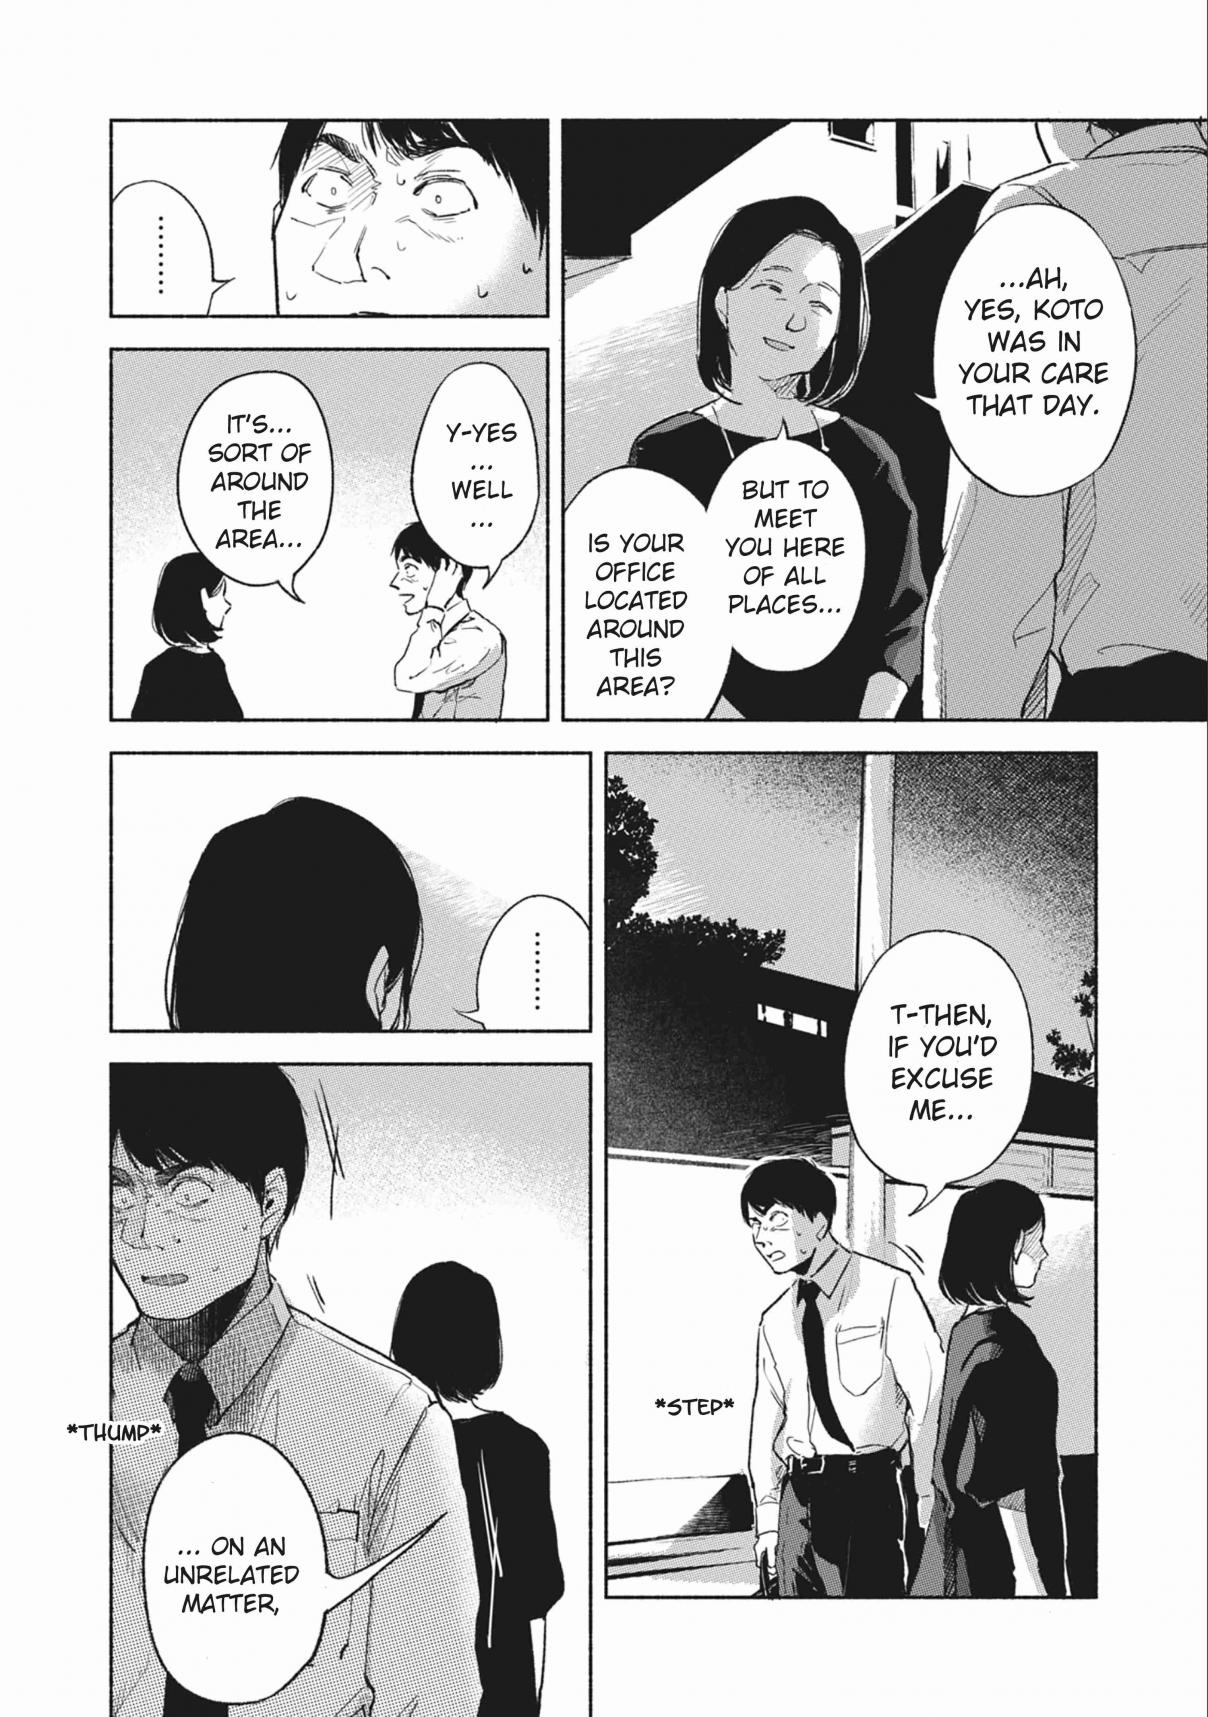 Musume no Tomodachi Vol. 4 Ch. 35 A Man Sniffed Out